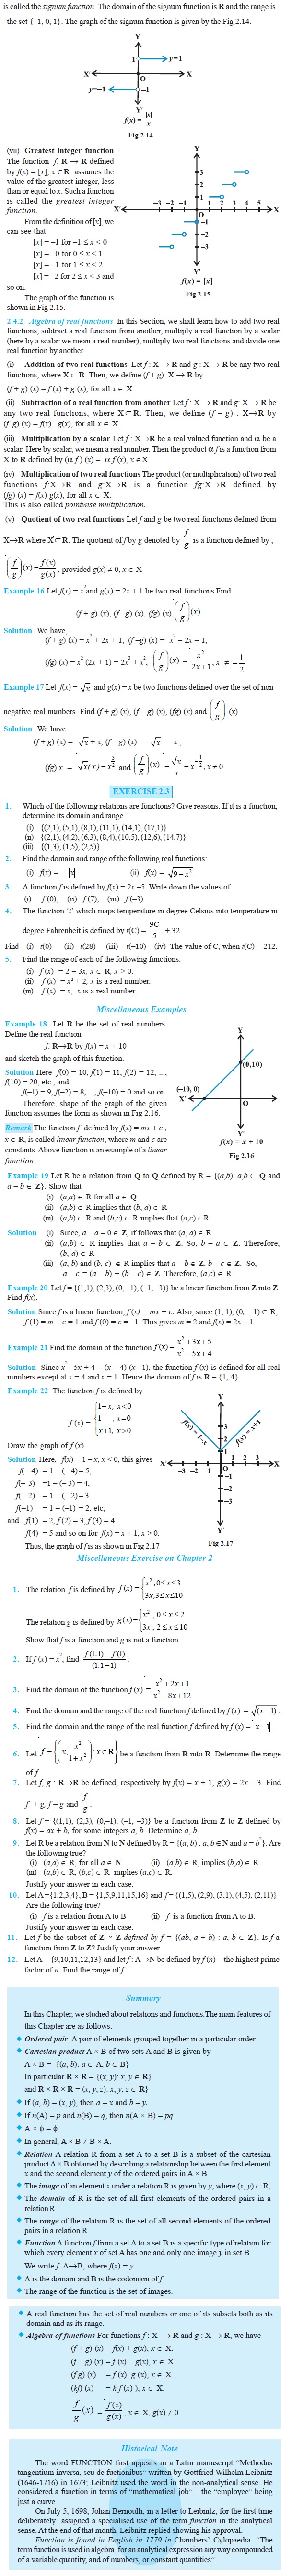 NCERT Class XI Mathematics Chapter 2 – Relations and Functions